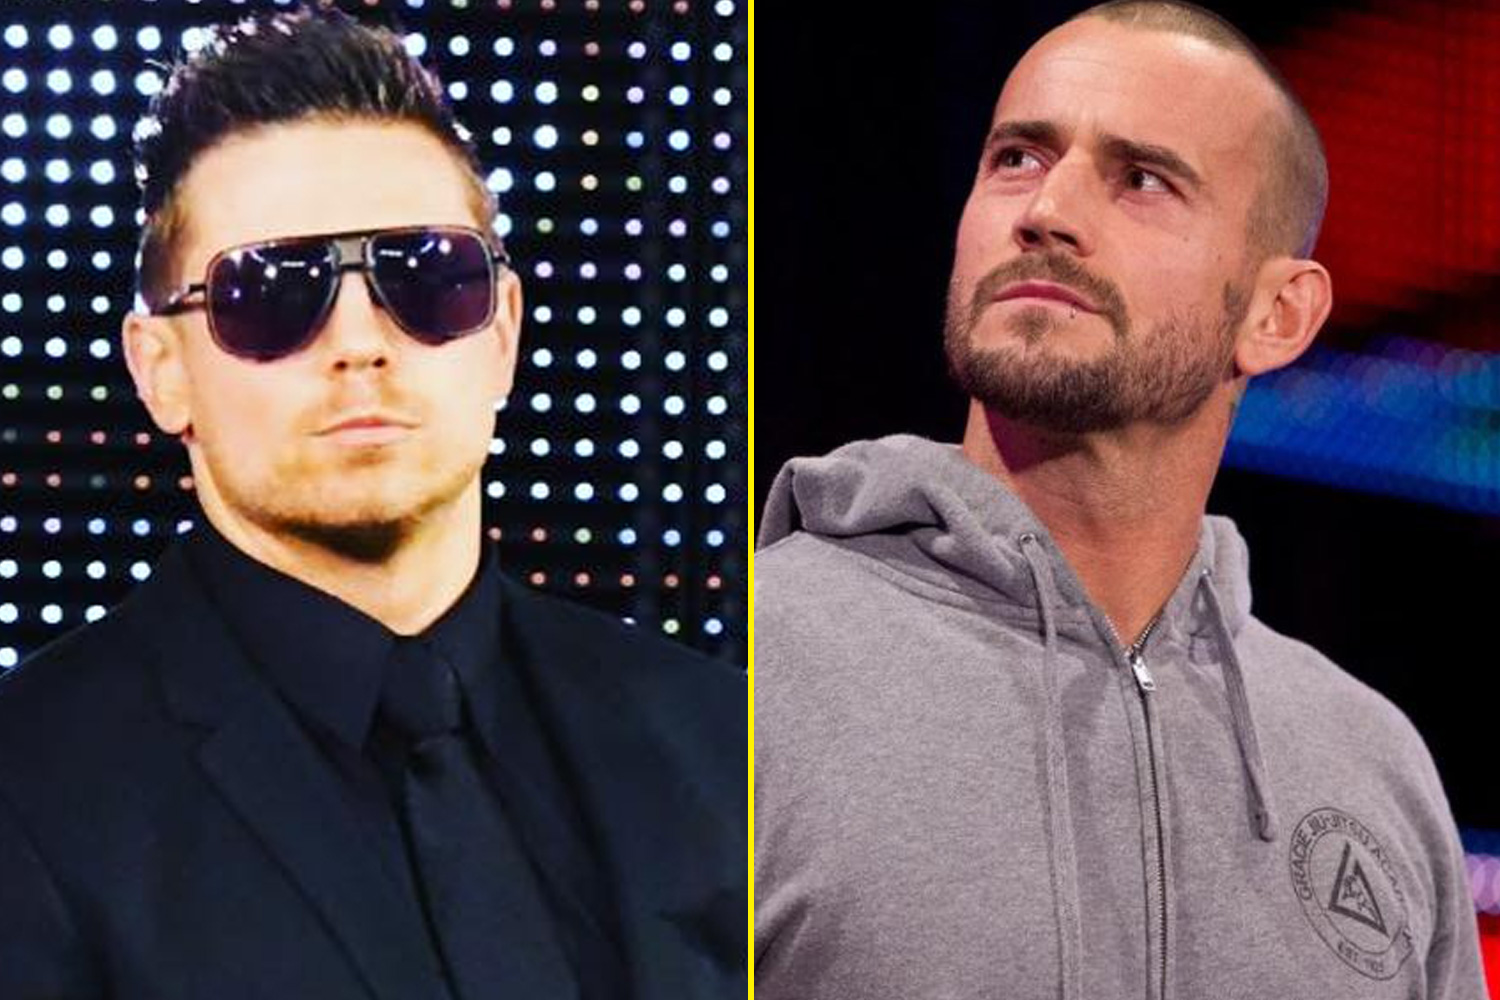 Prior to his WWE comeback, CM Punk and I settled our differences, reveals The Miz.